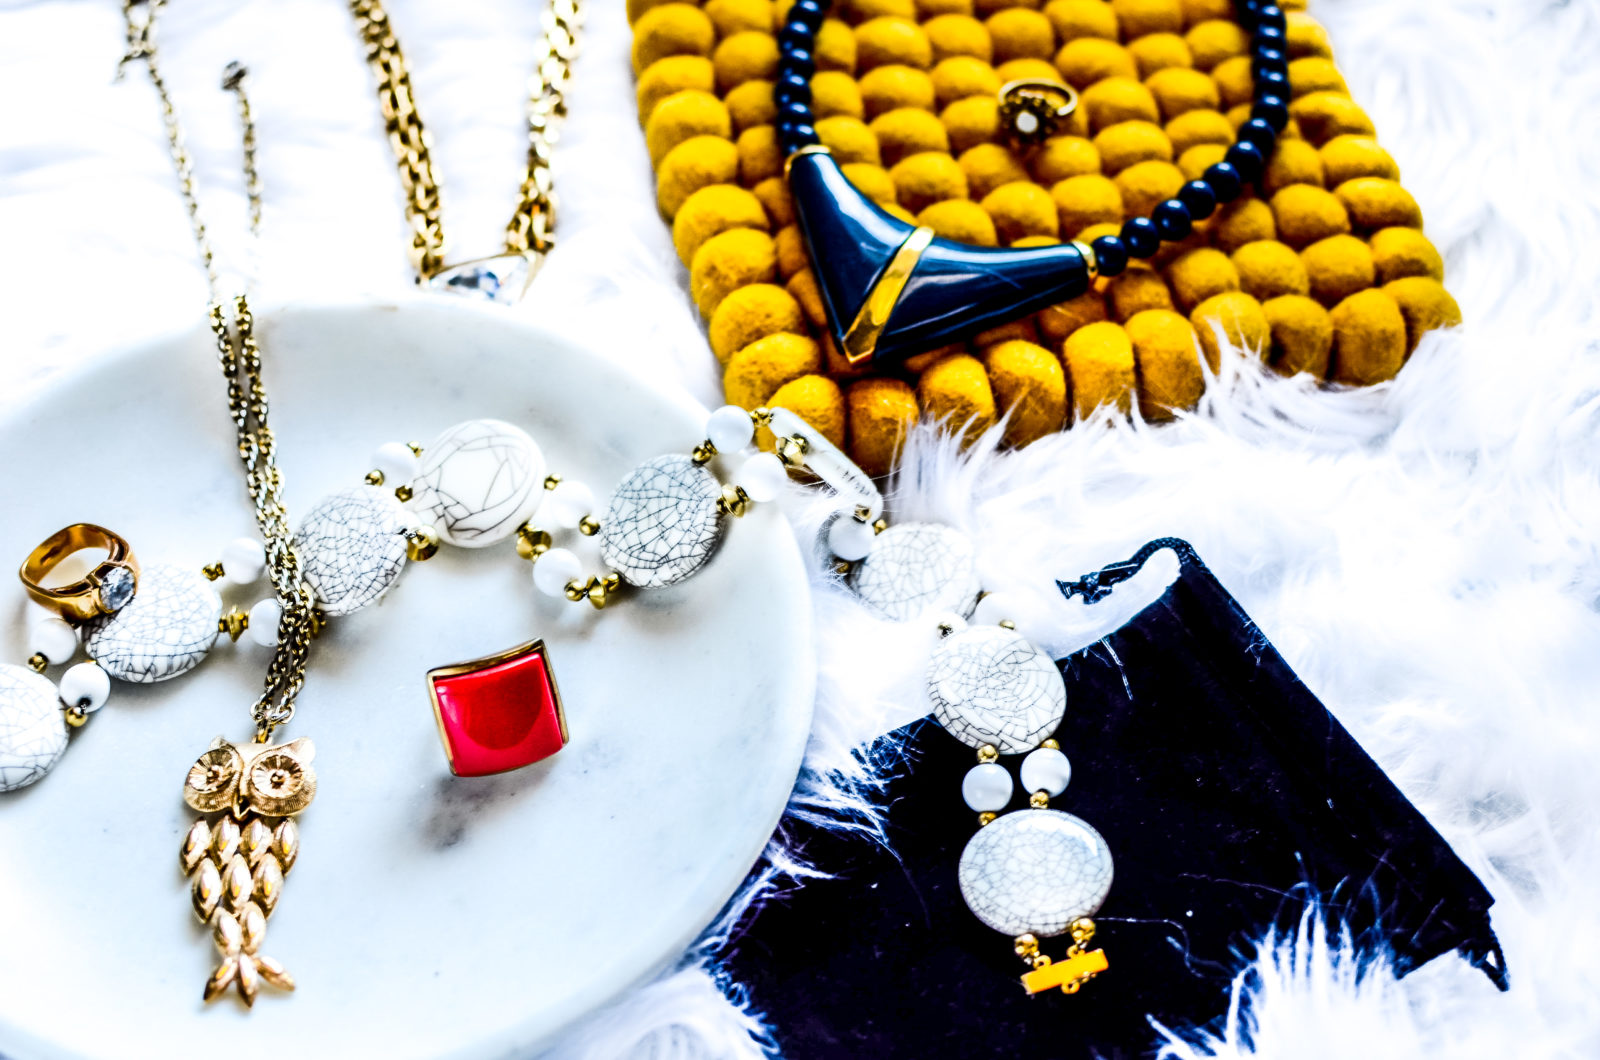 In order to curate your own vintage jewelry collection, there are a few things you need to know. Ready to experience the magic of vintage?